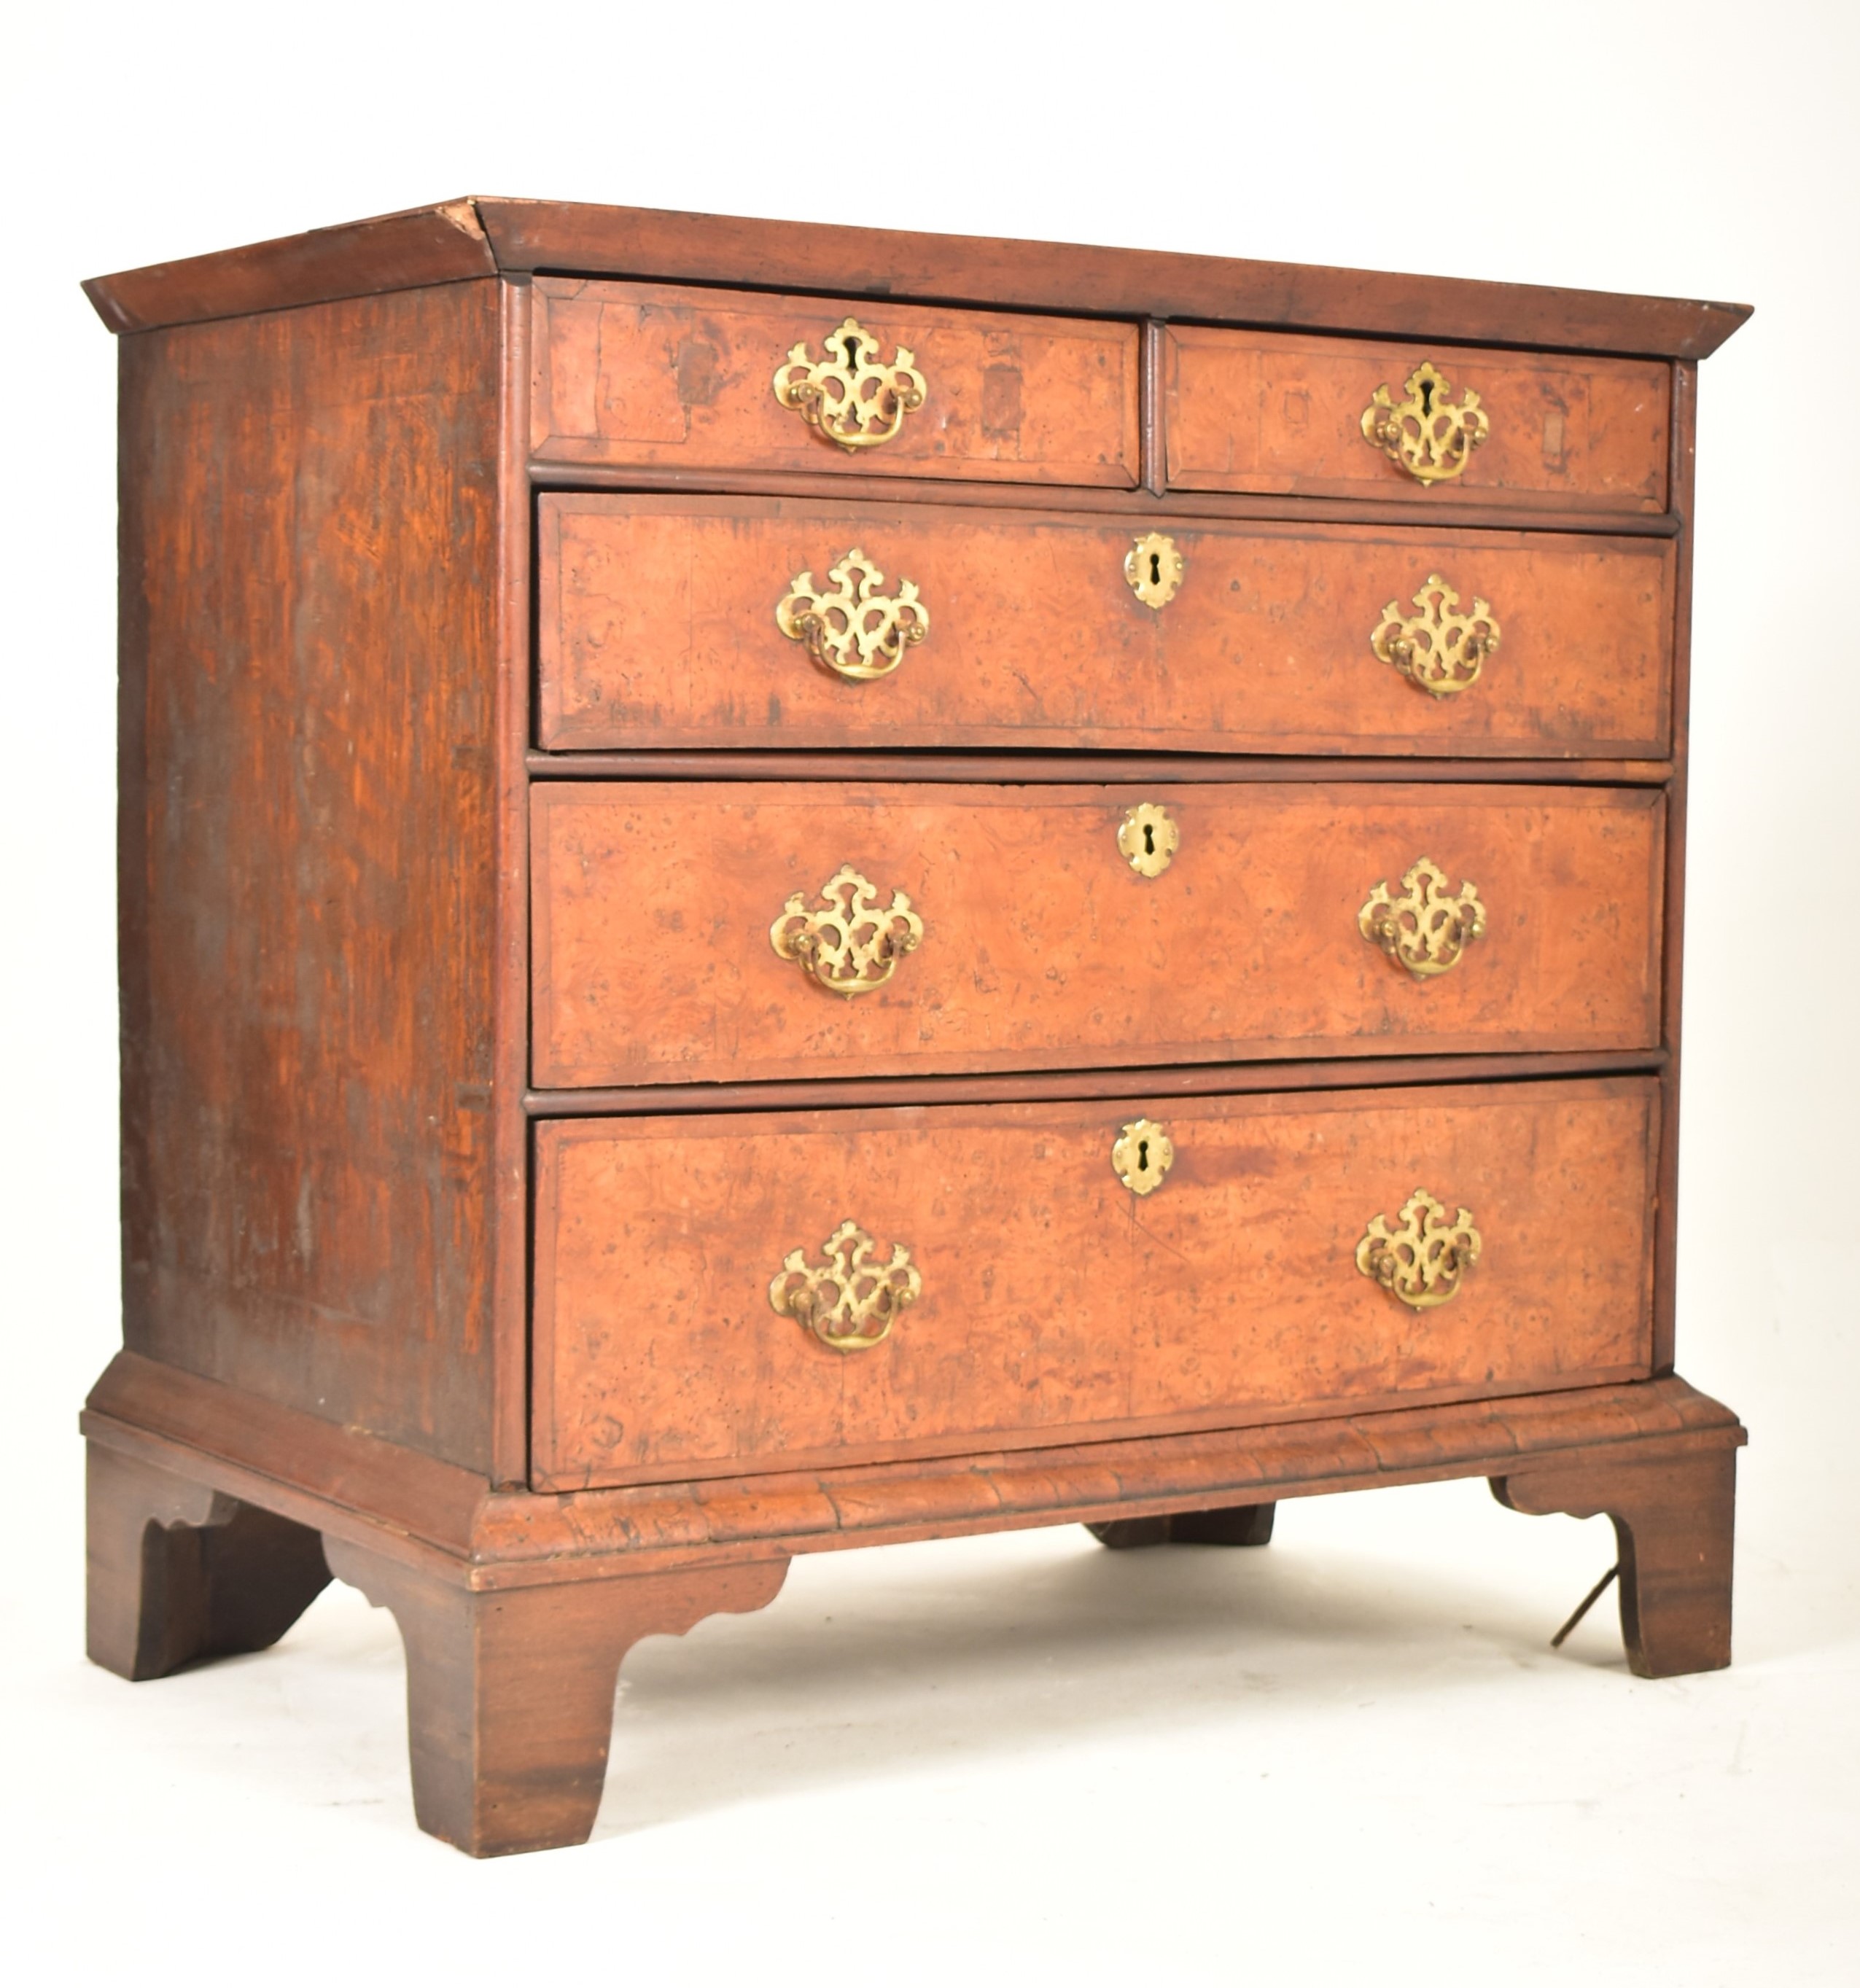 QUEEN ANNE BURR WALNUT & MAHOGANY CHEST OF DRAWERS